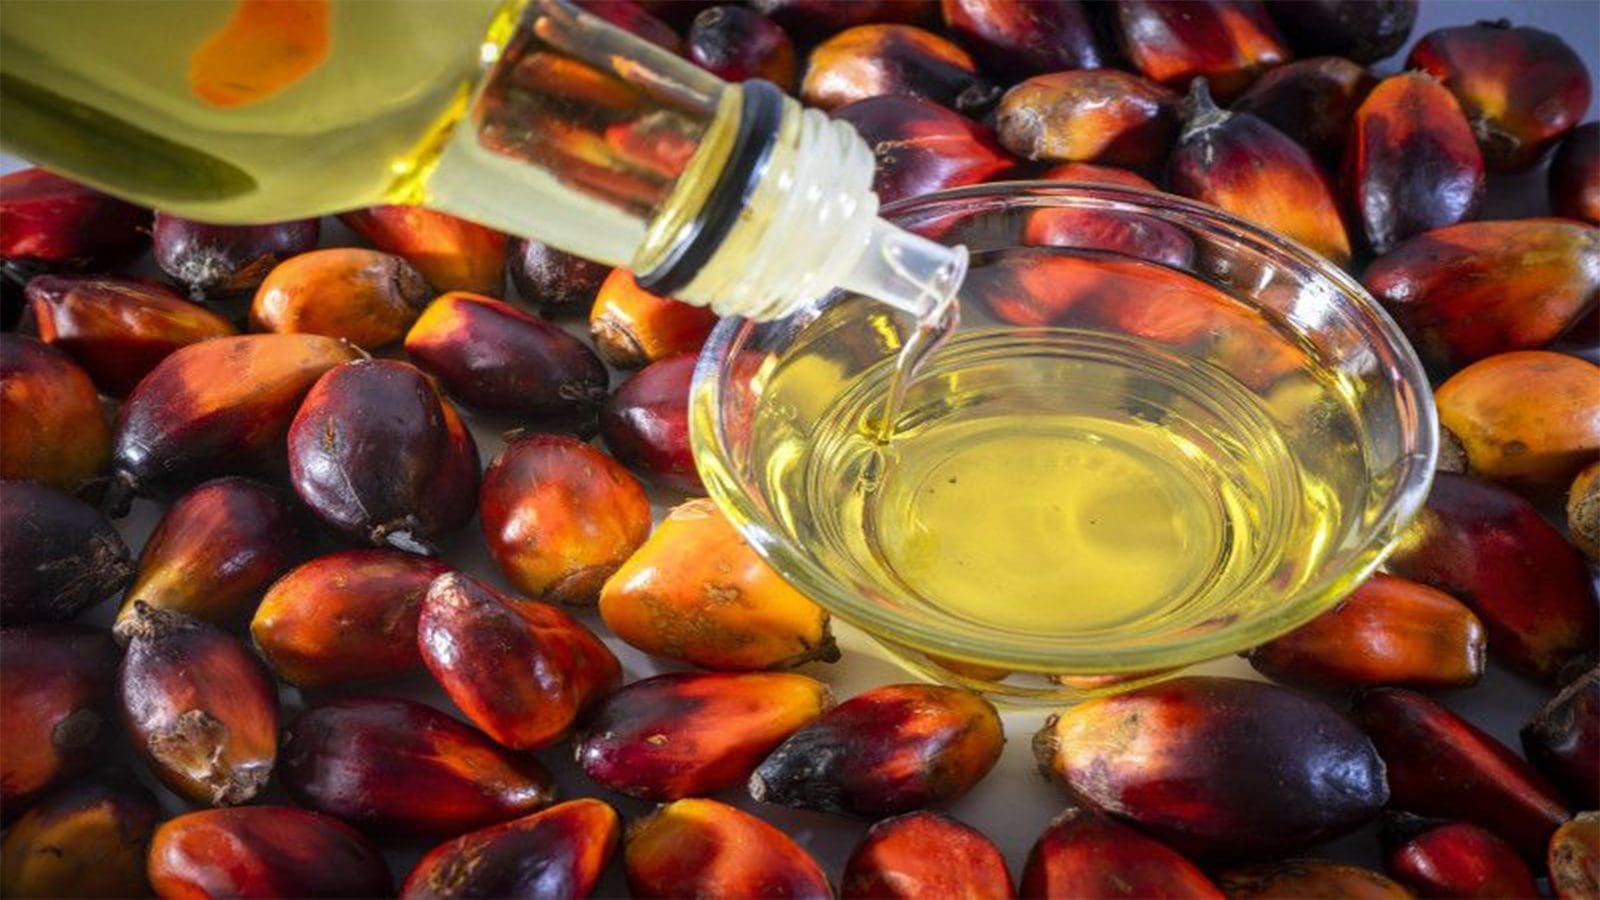 Tanzania discovers new high-yielding palm oil seeds